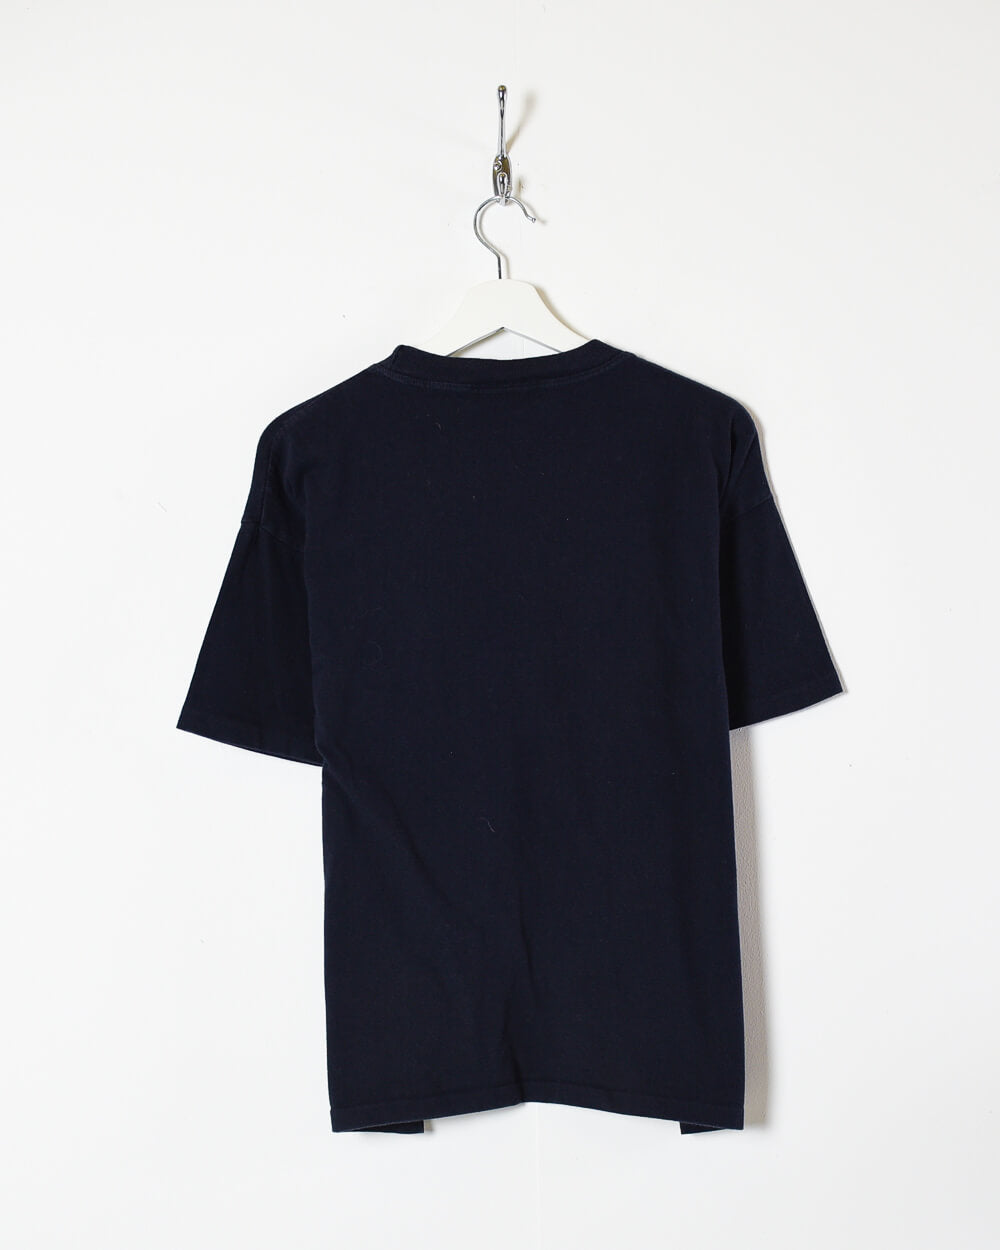 Black The Sweater Shop T-Shirt - Small